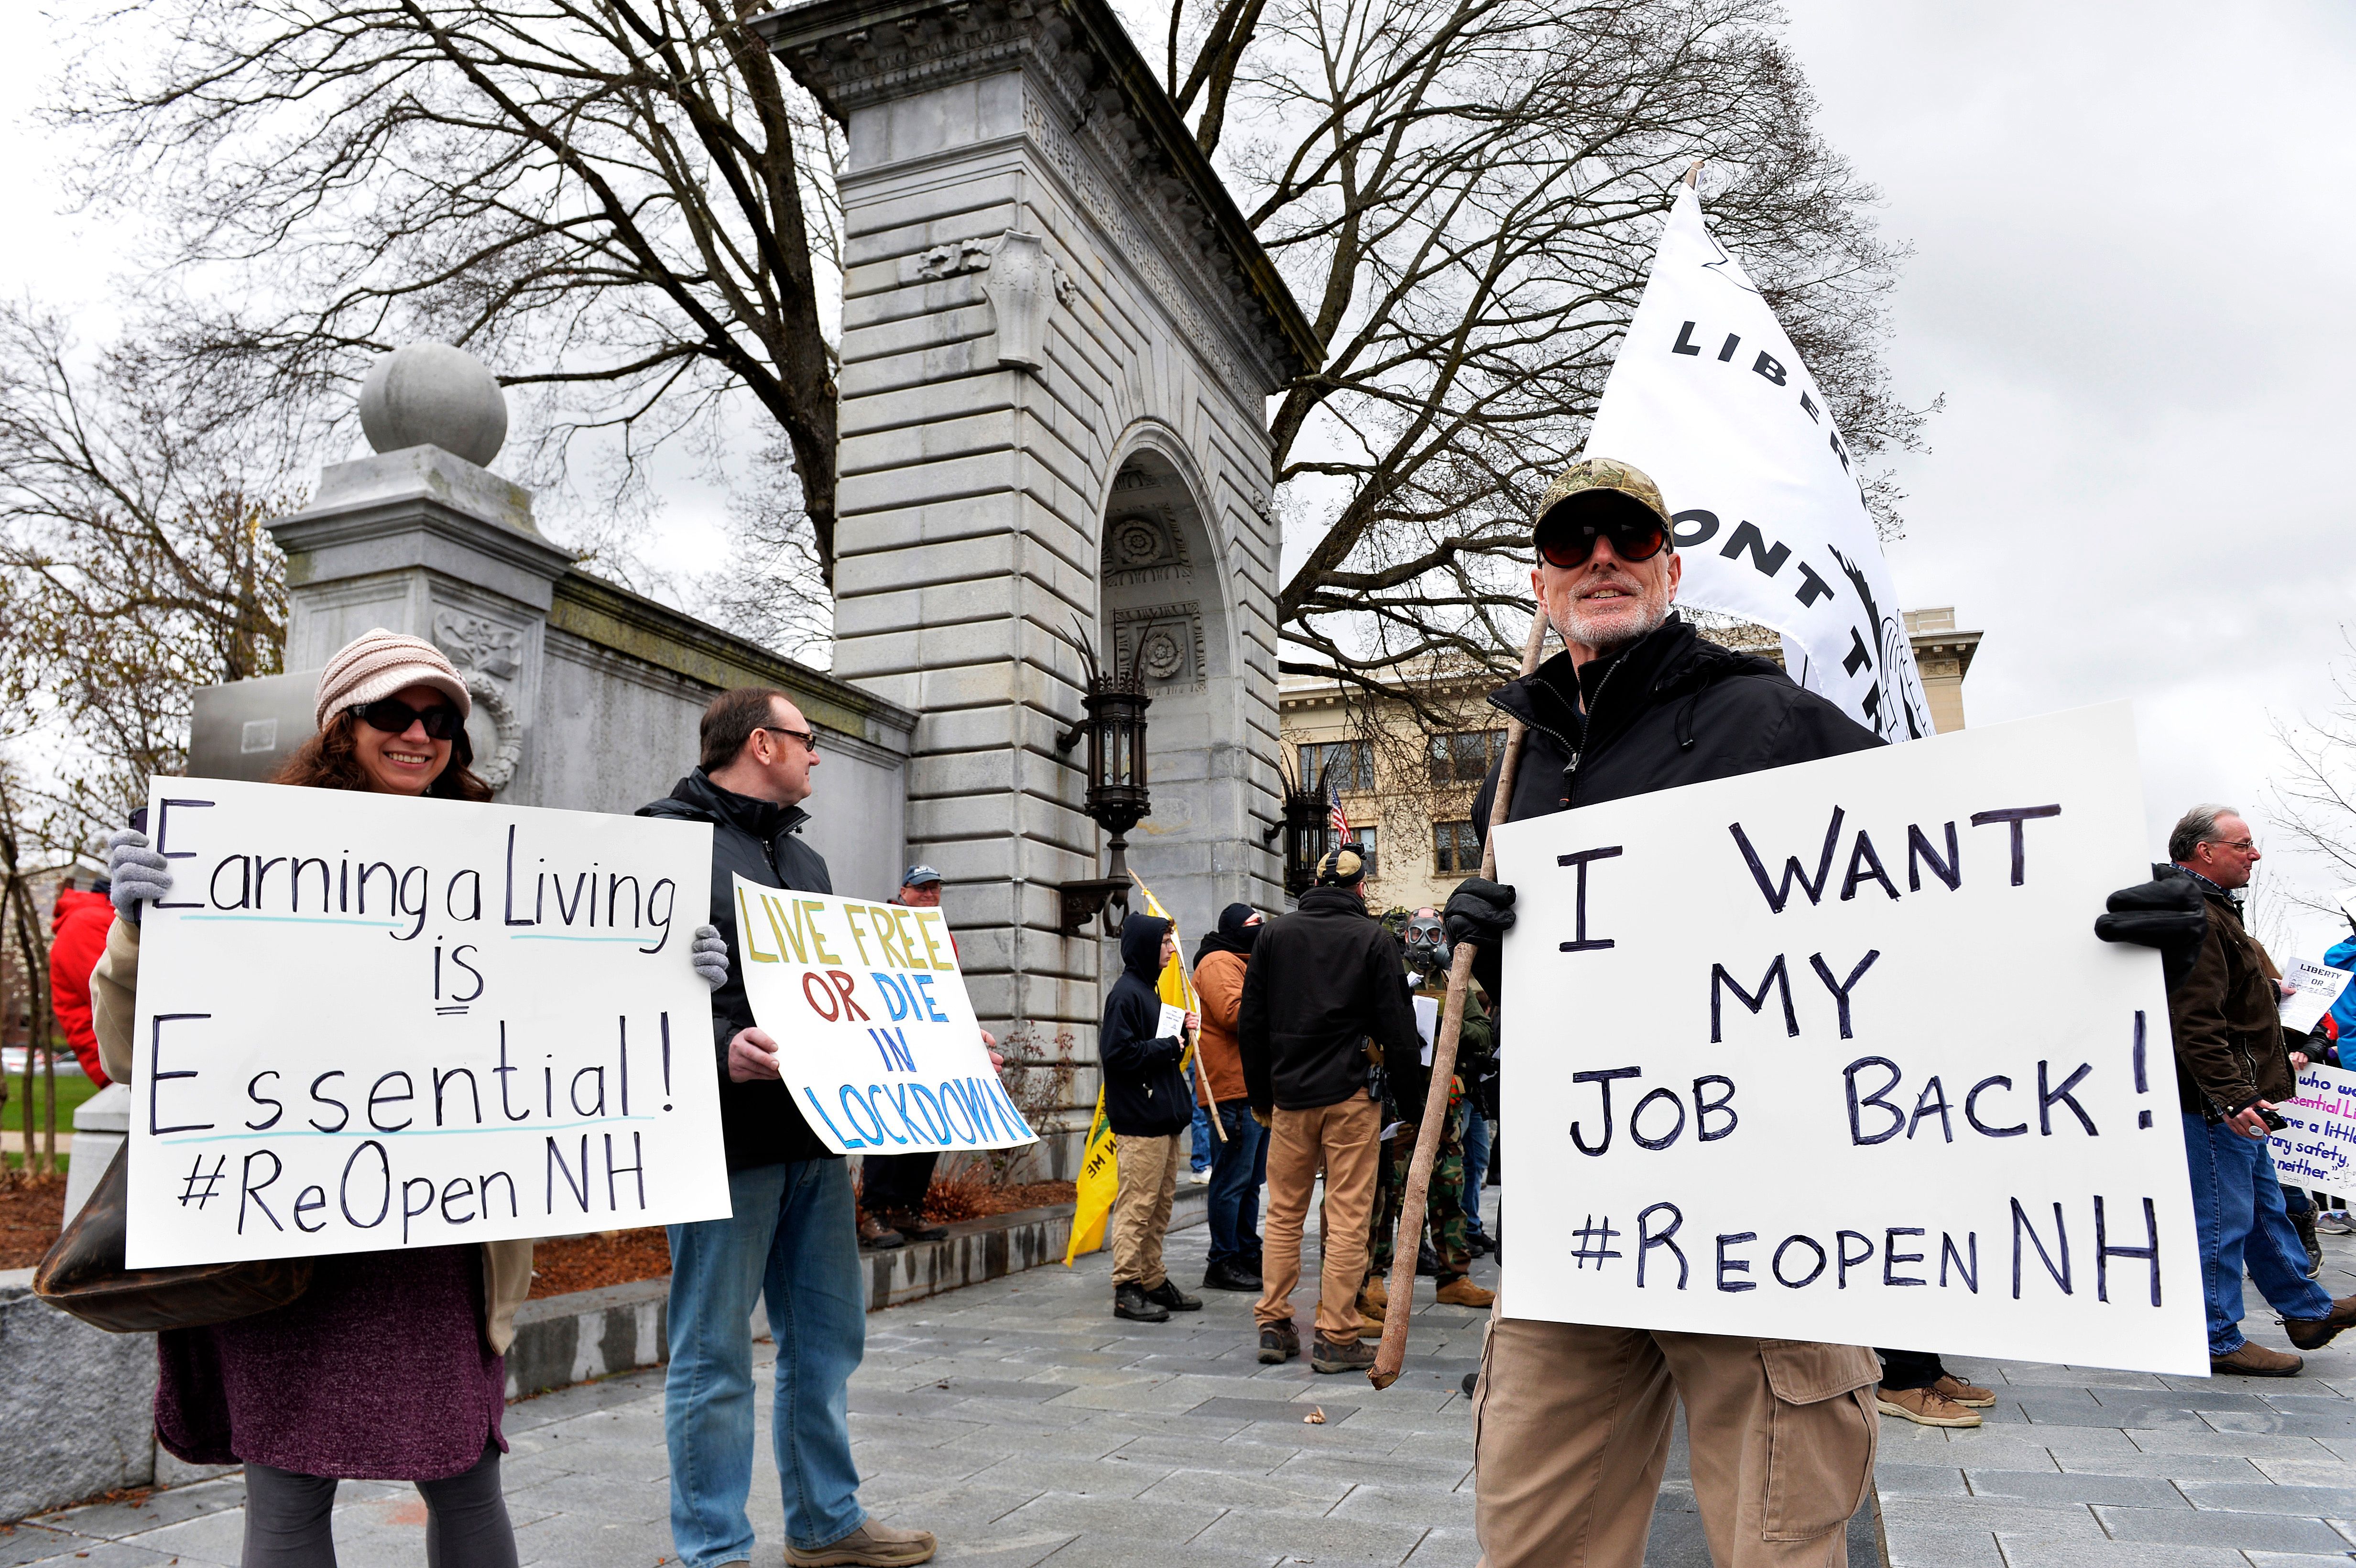 In this image, a woman holds a sign that reads "earning a living is essential" and a man holds a sign that reads "i want my job back"